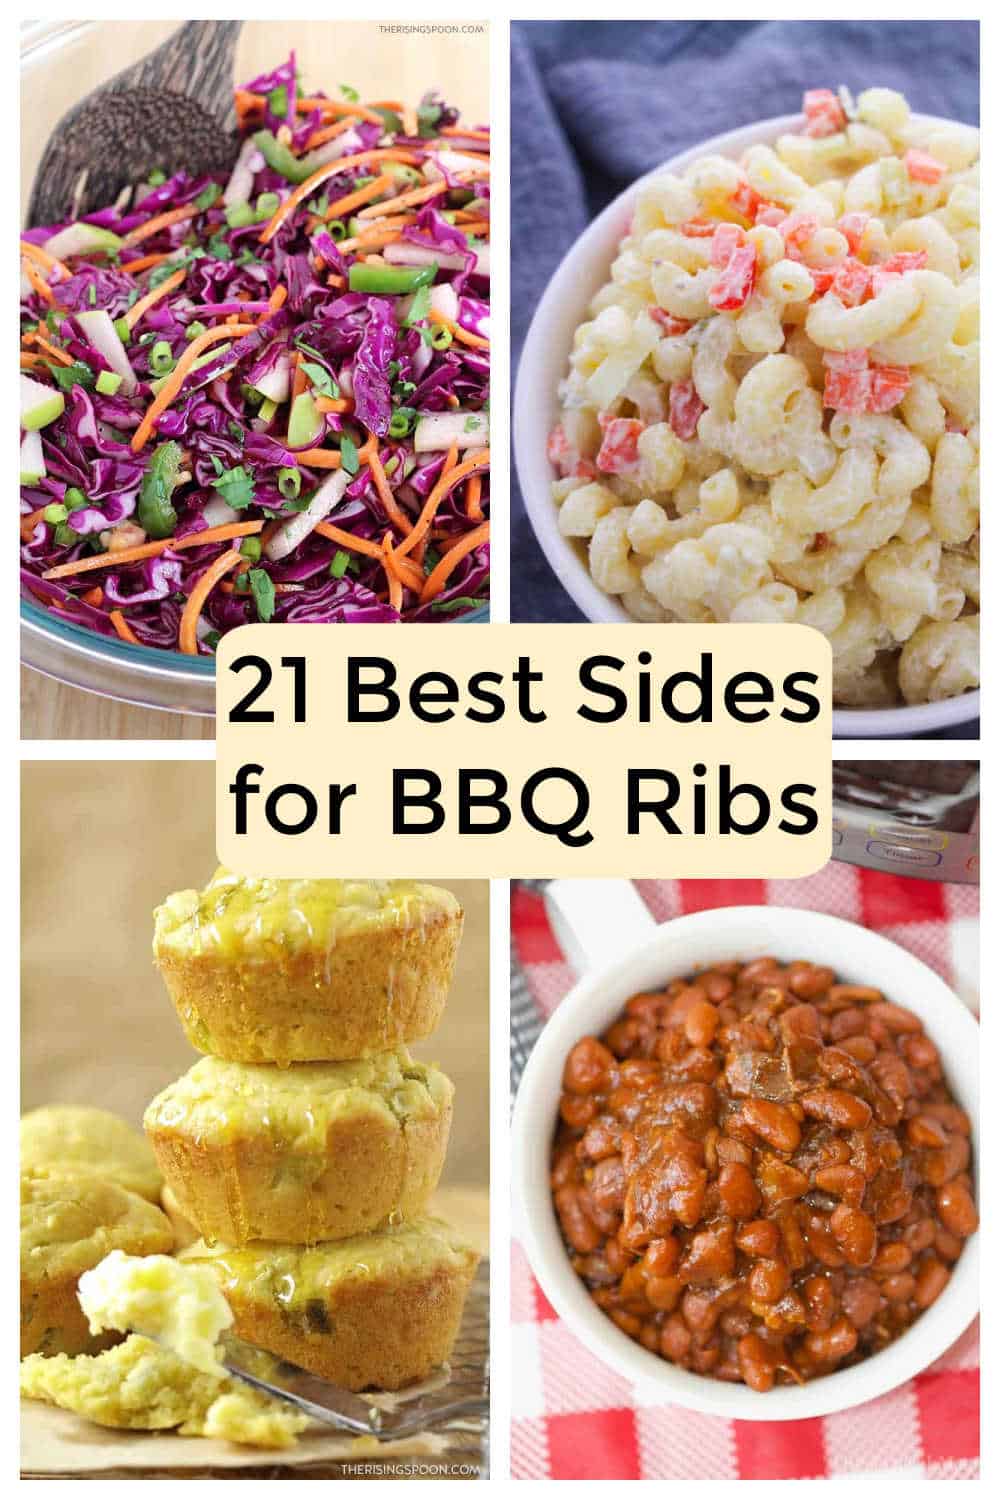 collage with images of side dishes for pork ribs, including corn bread, beans and coleslaw.